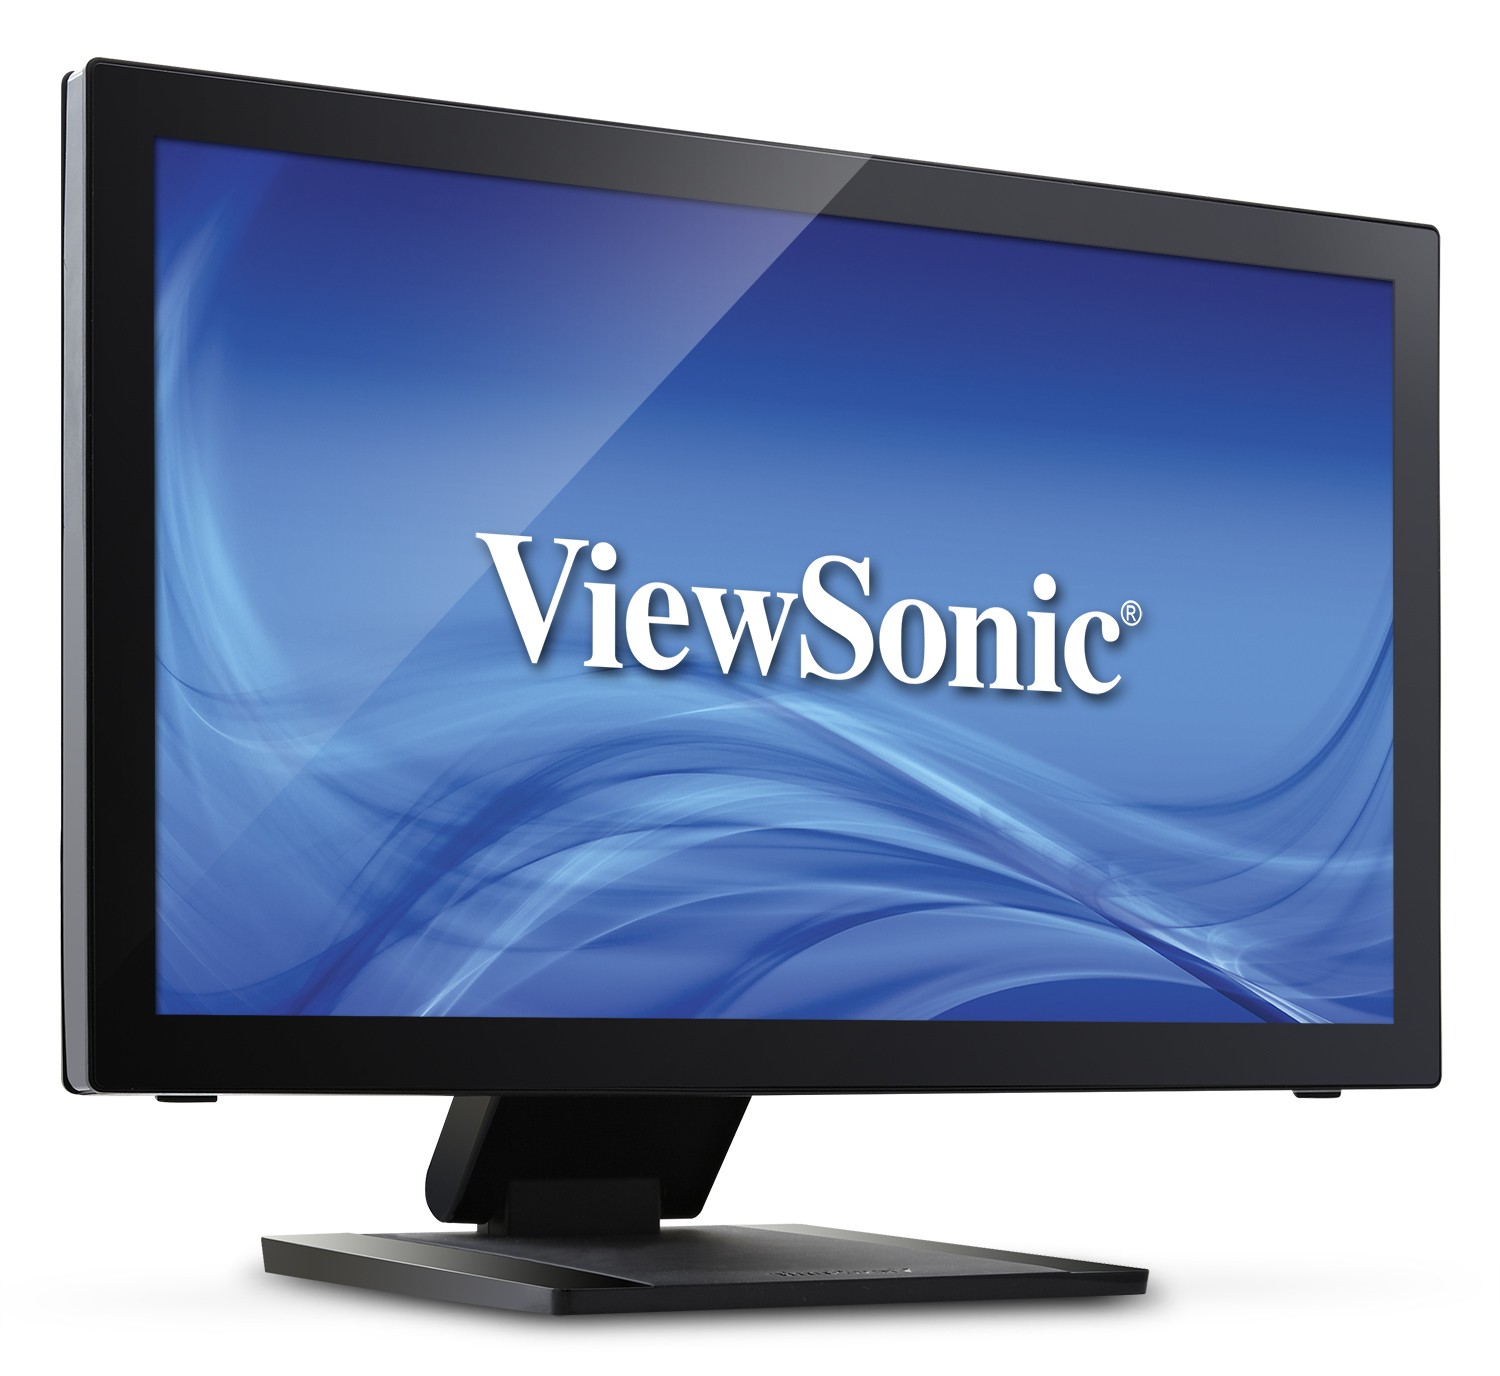 Media asset in full size related to 3dfxzone.it news item entitled as follows: ViewSonic annuncia il monitor multi-touch a 10 punti TD2240 | Image Name: news20782_ViewSonic-TD2240_2.jpg